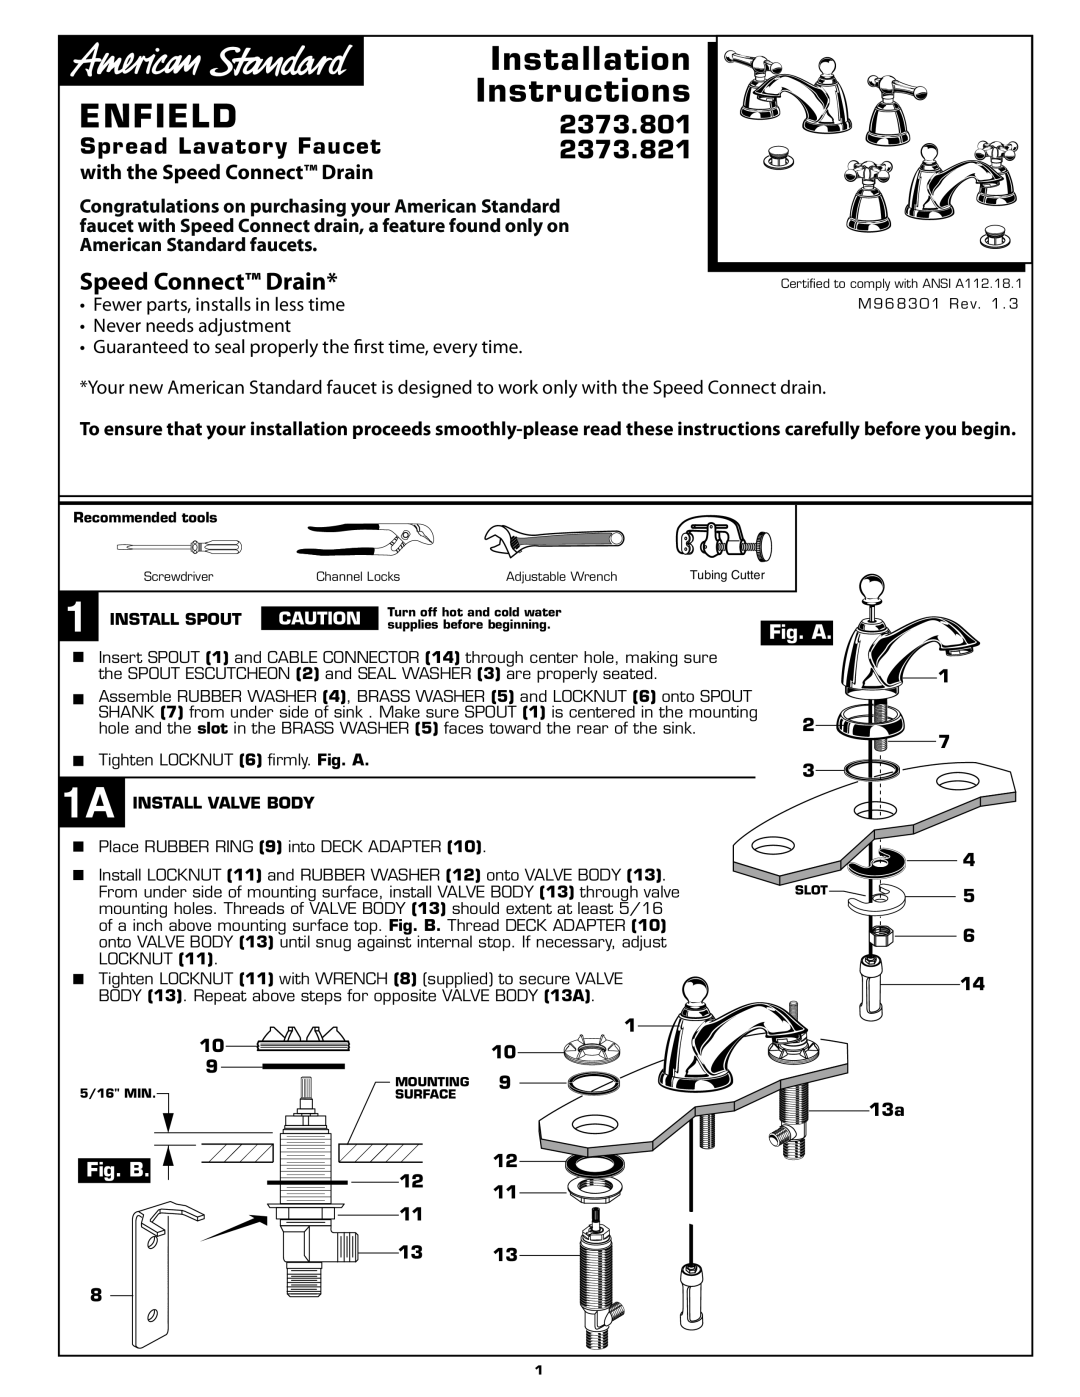 American Standard 2373.821 installation instructions 2373.801, Speed Connect Drain, Spread Lavatory Faucet, Installation 